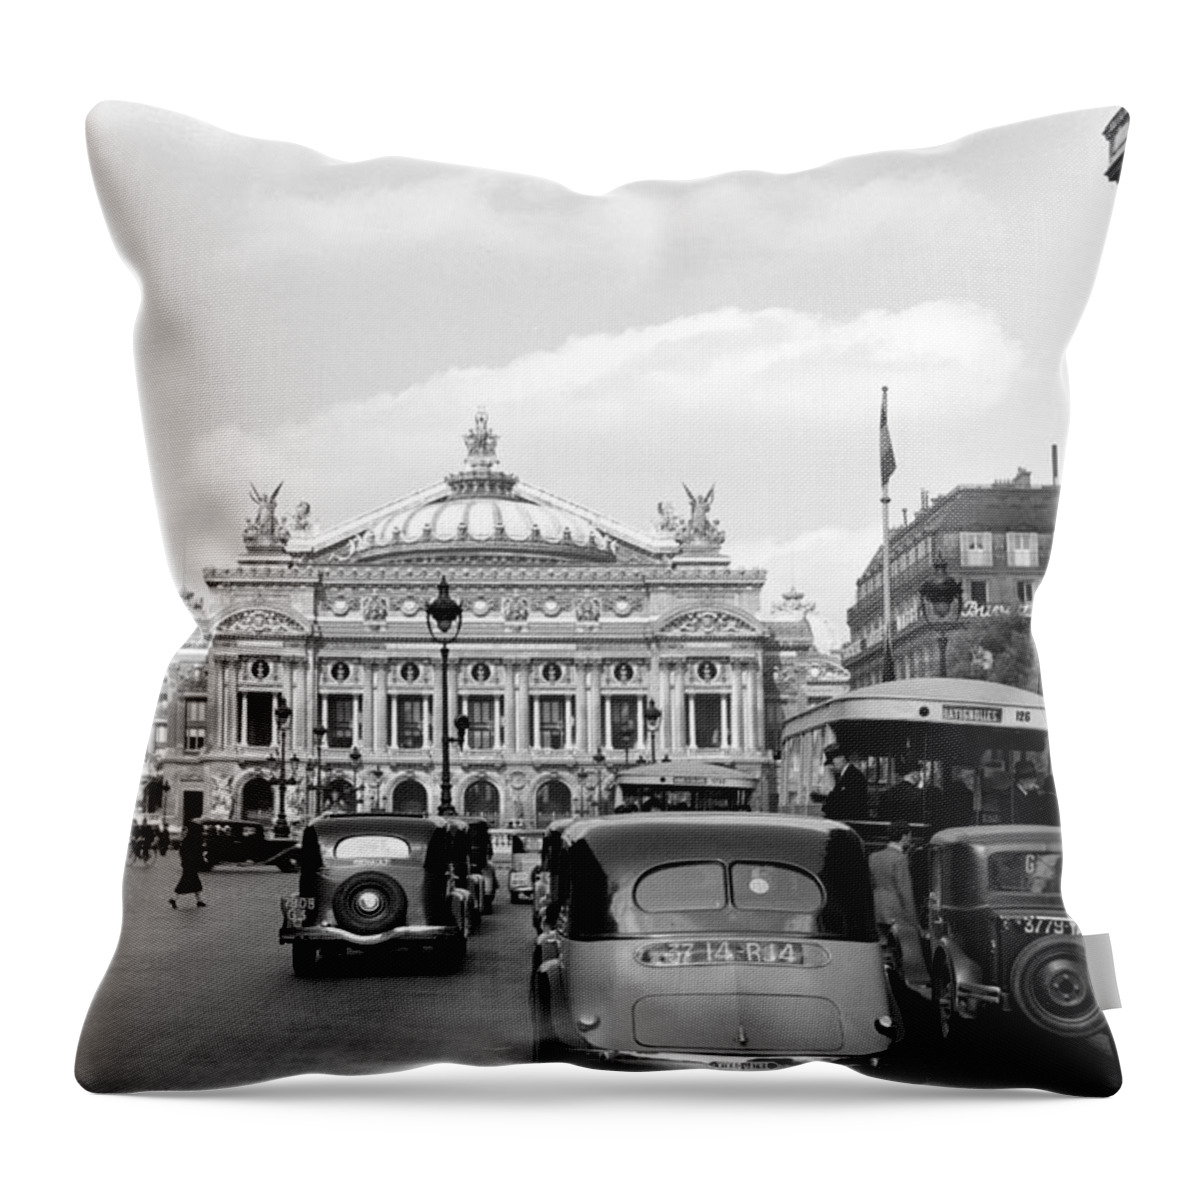 Paris Throw Pillow featuring the photograph Paris Opera 1935 by Andrew Fare